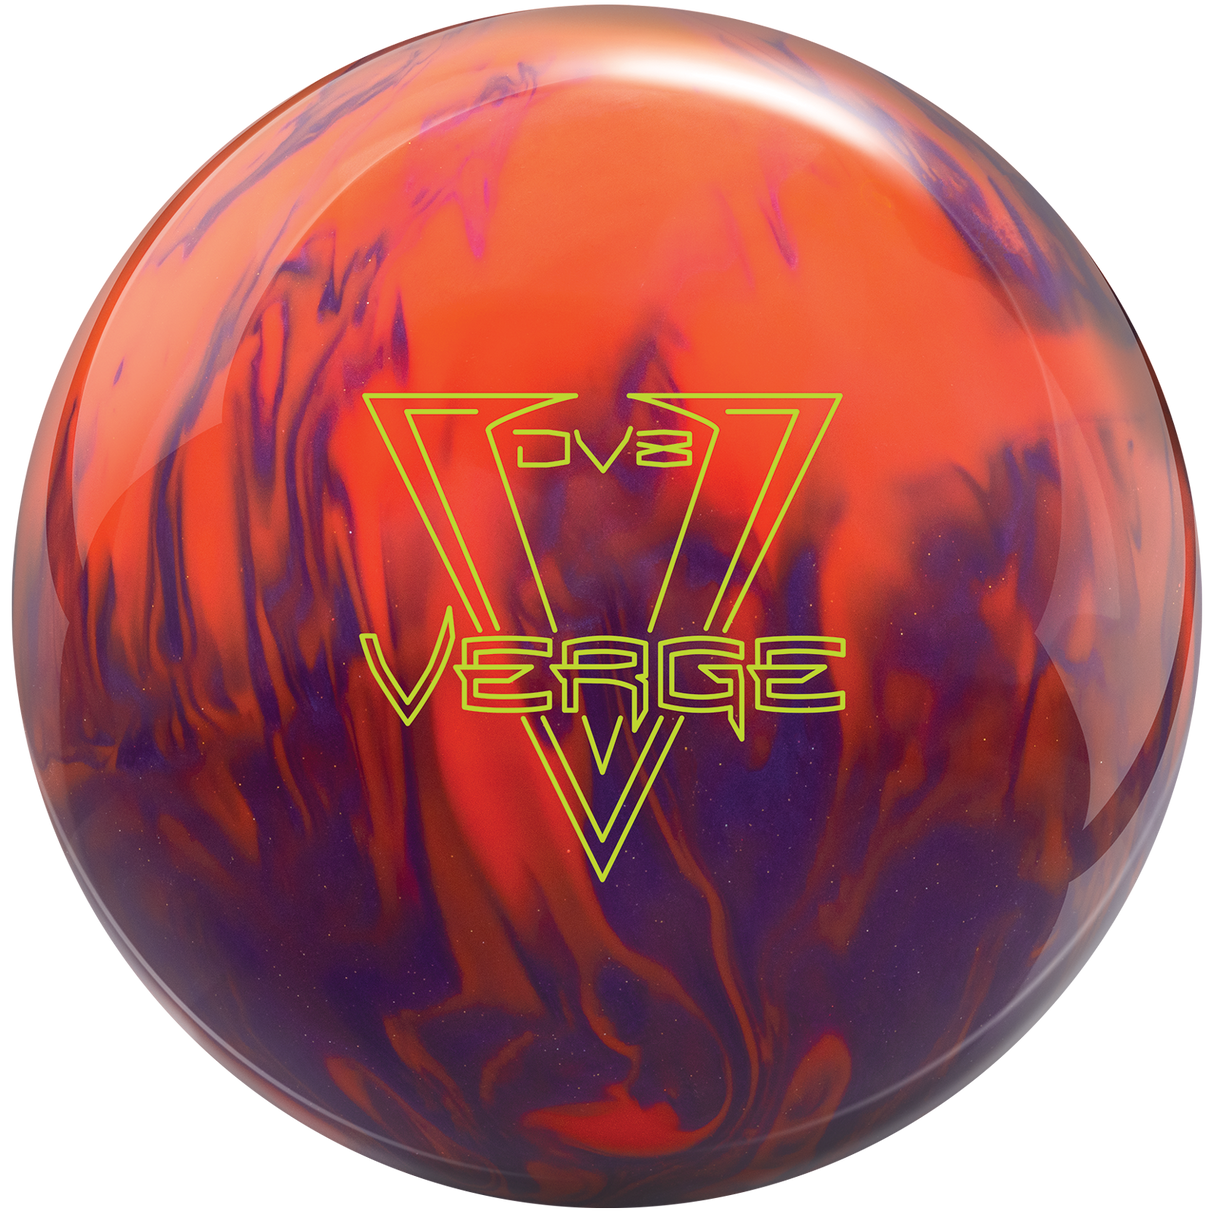 dv8 verge bowling ball solid orange learn to bowl inside bowling ball hook curve sale discount cheap coupon